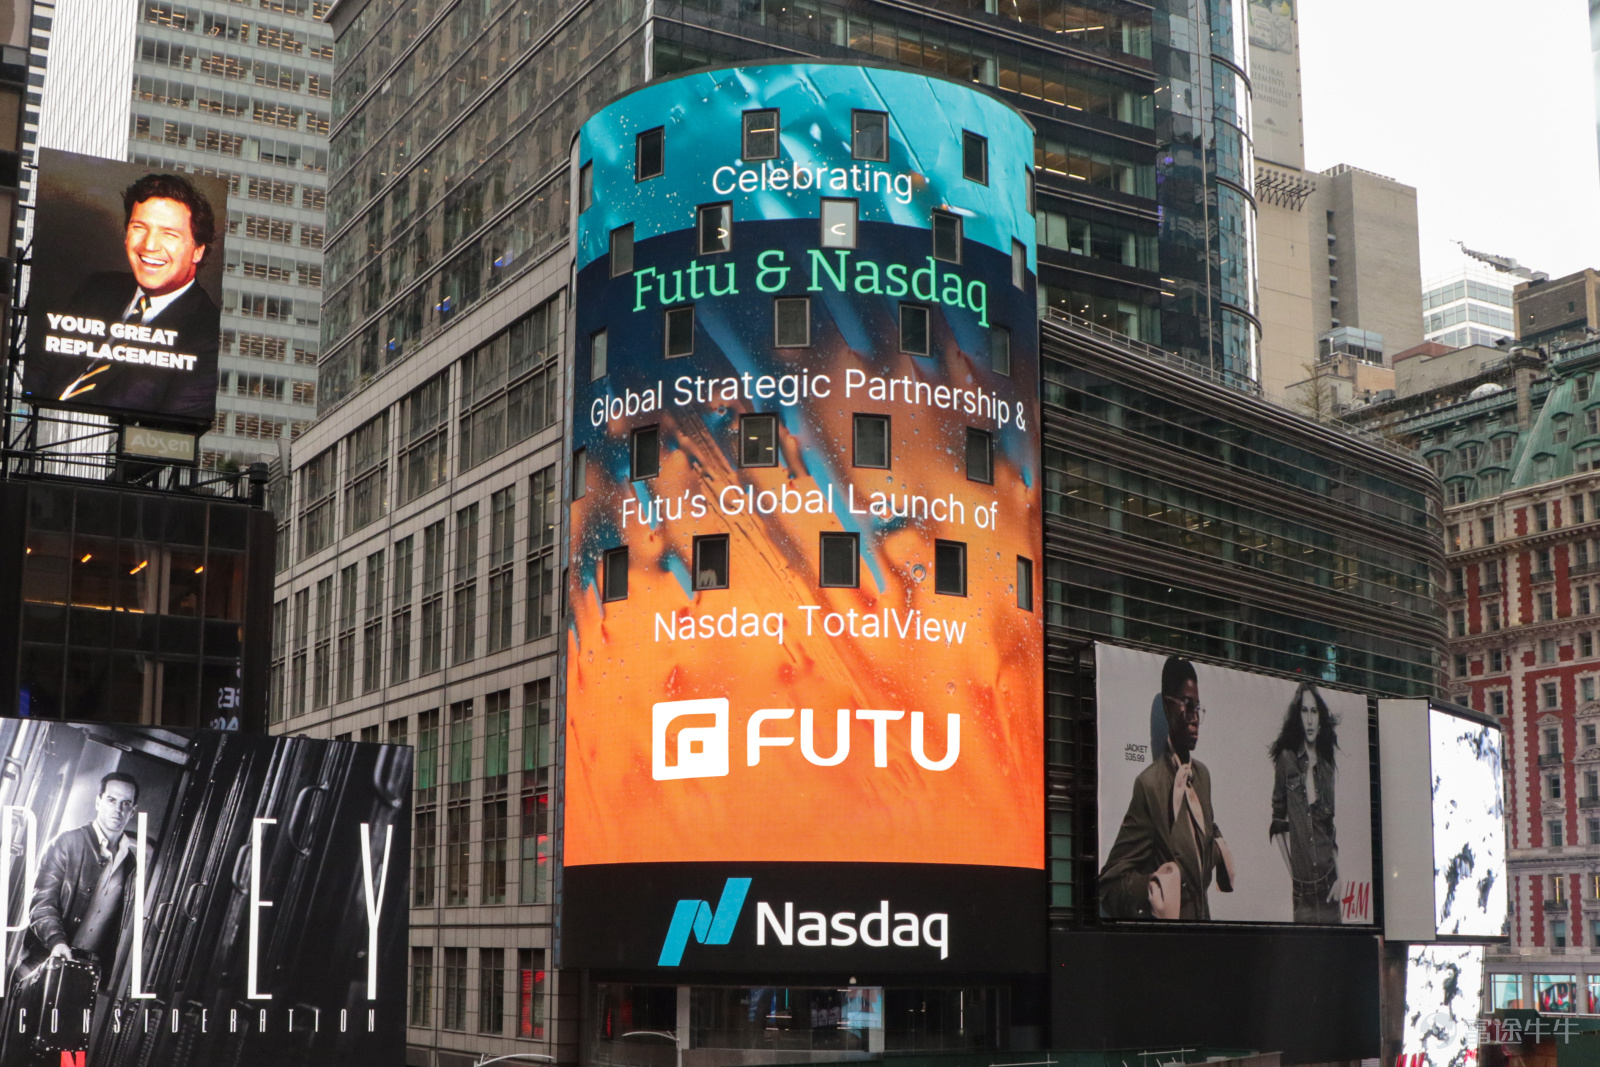 Fortune and Nasdaq Hold Strategic Partnership Launch Ceremony for 10th Anniversary of Collaboration to Promote Financial Services Upgrades